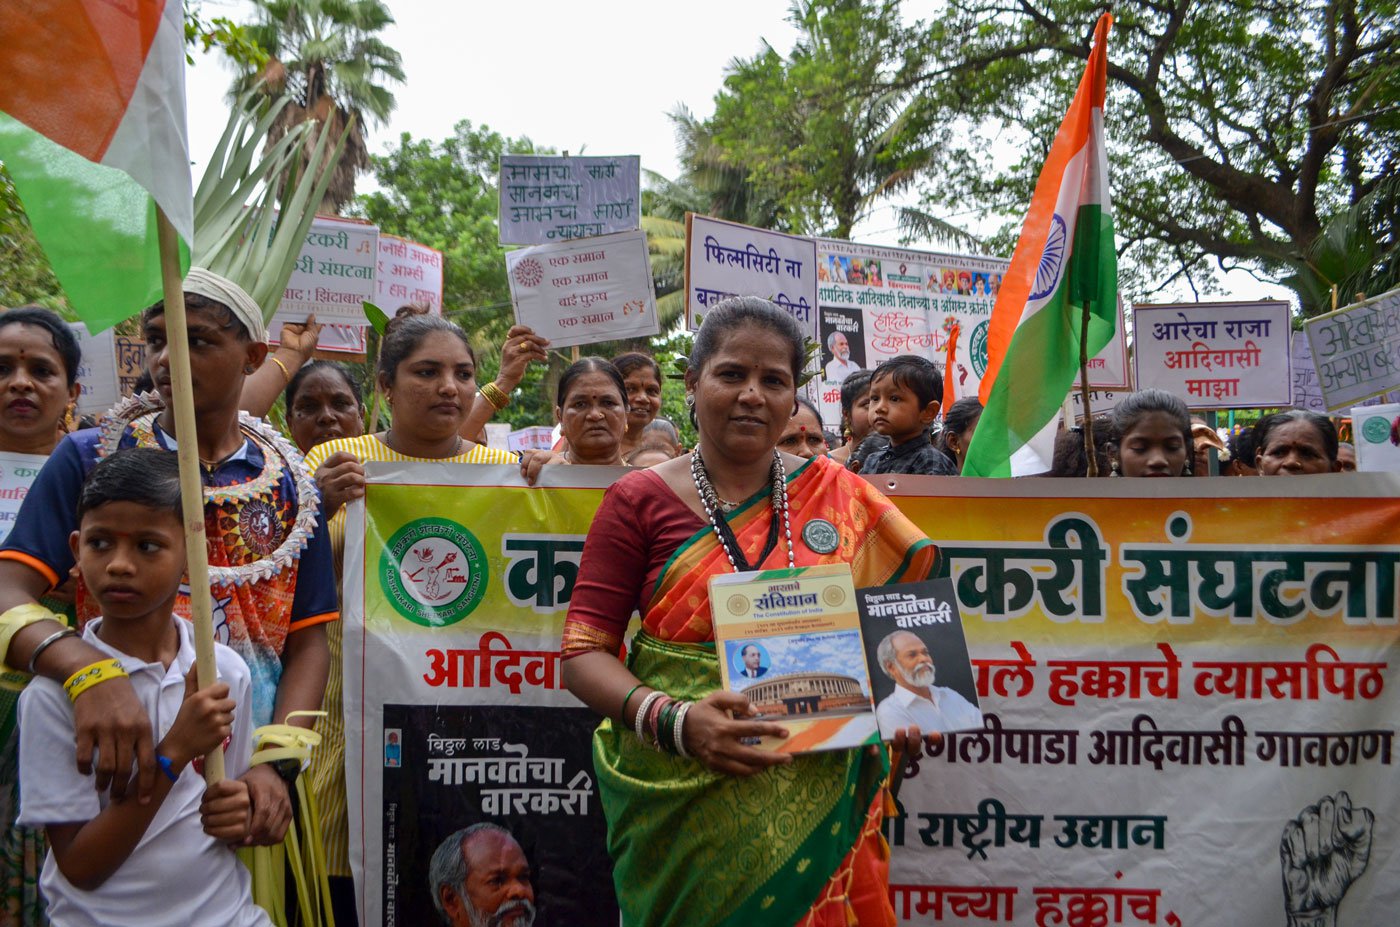 Shakuntala Dalvi, a KSS activist, holds up the Indian Constitution and a book written by Vitthal Lad